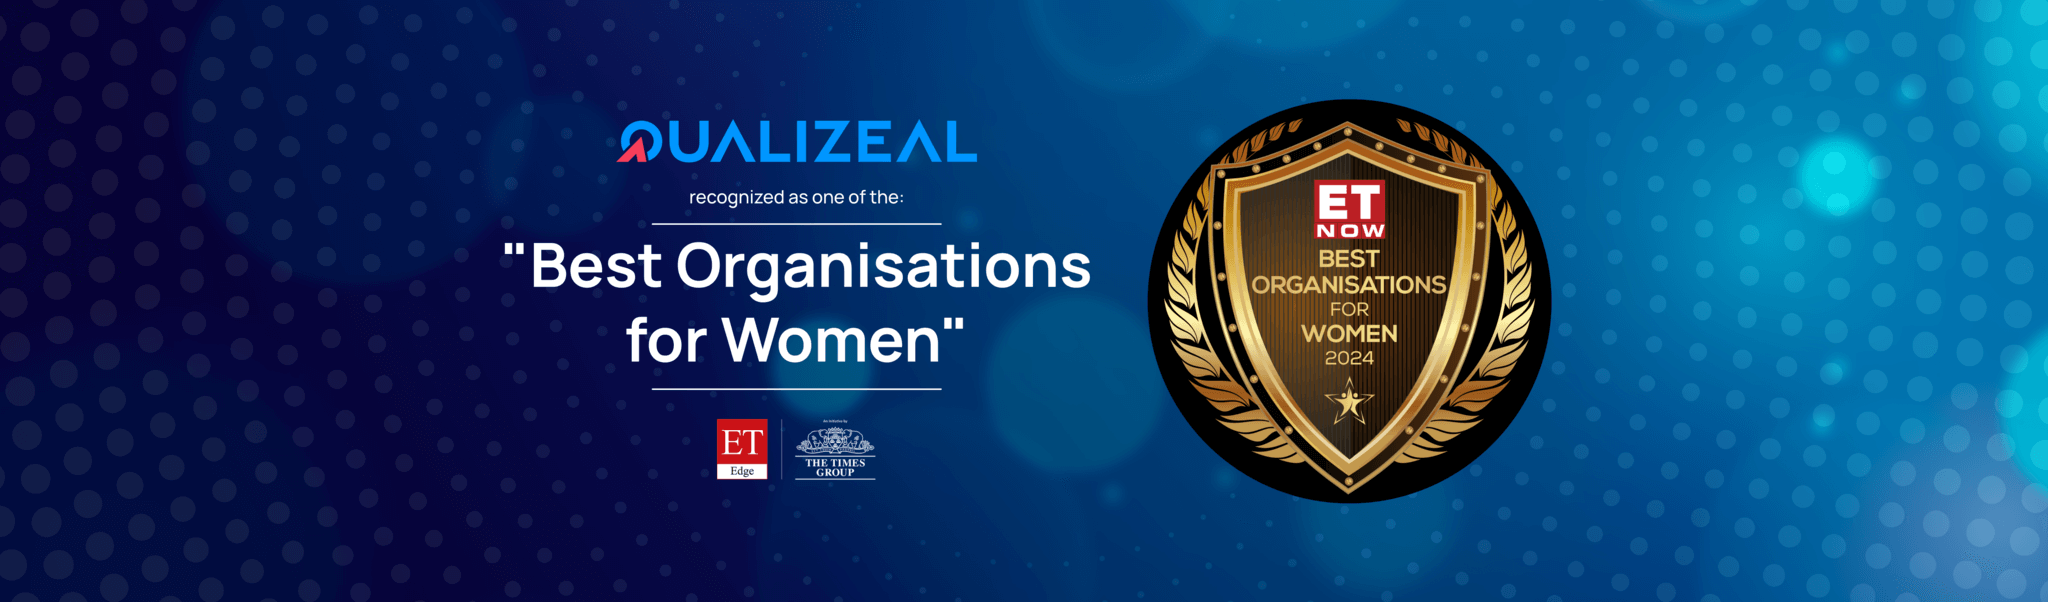 QualiZeal Awarded “Best Place to Work for Women” by ET Edge